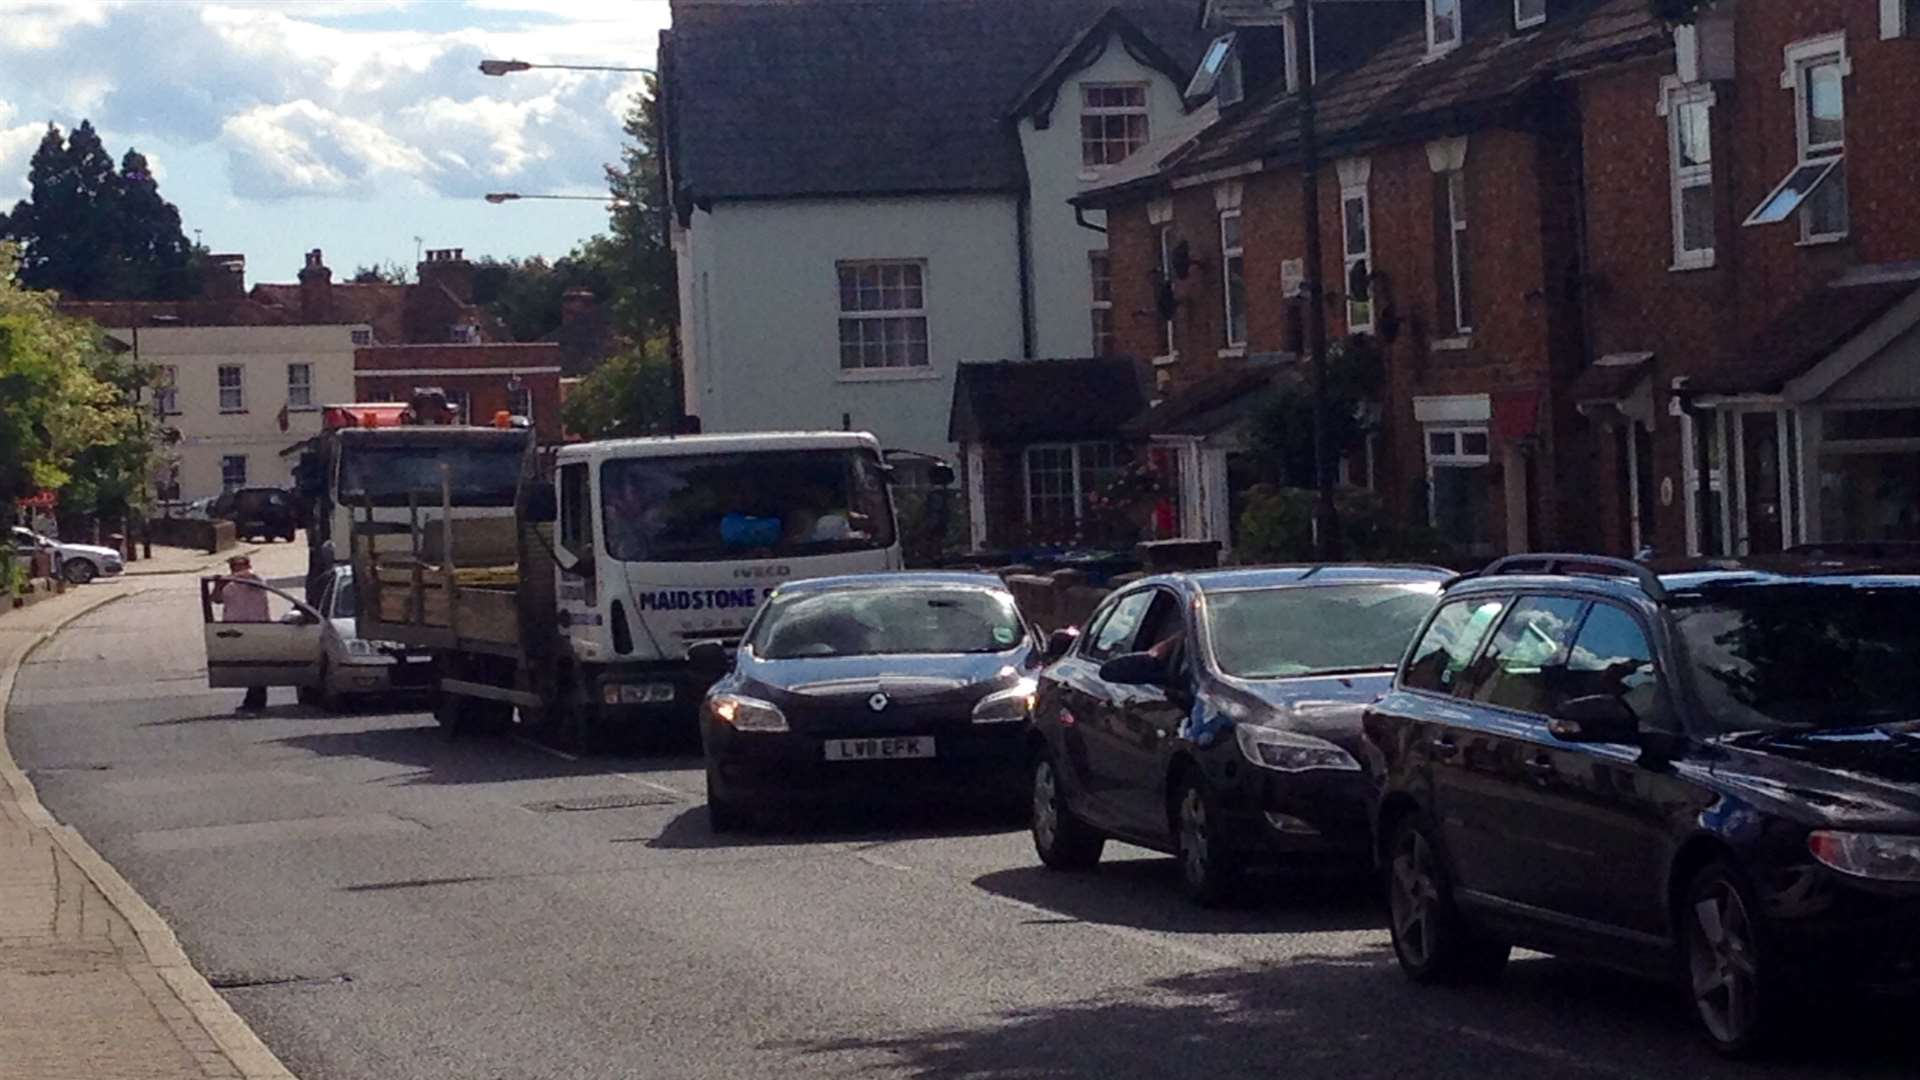 There are tailbacks in Hadlow as attempts are made to dislodge a portable cabin